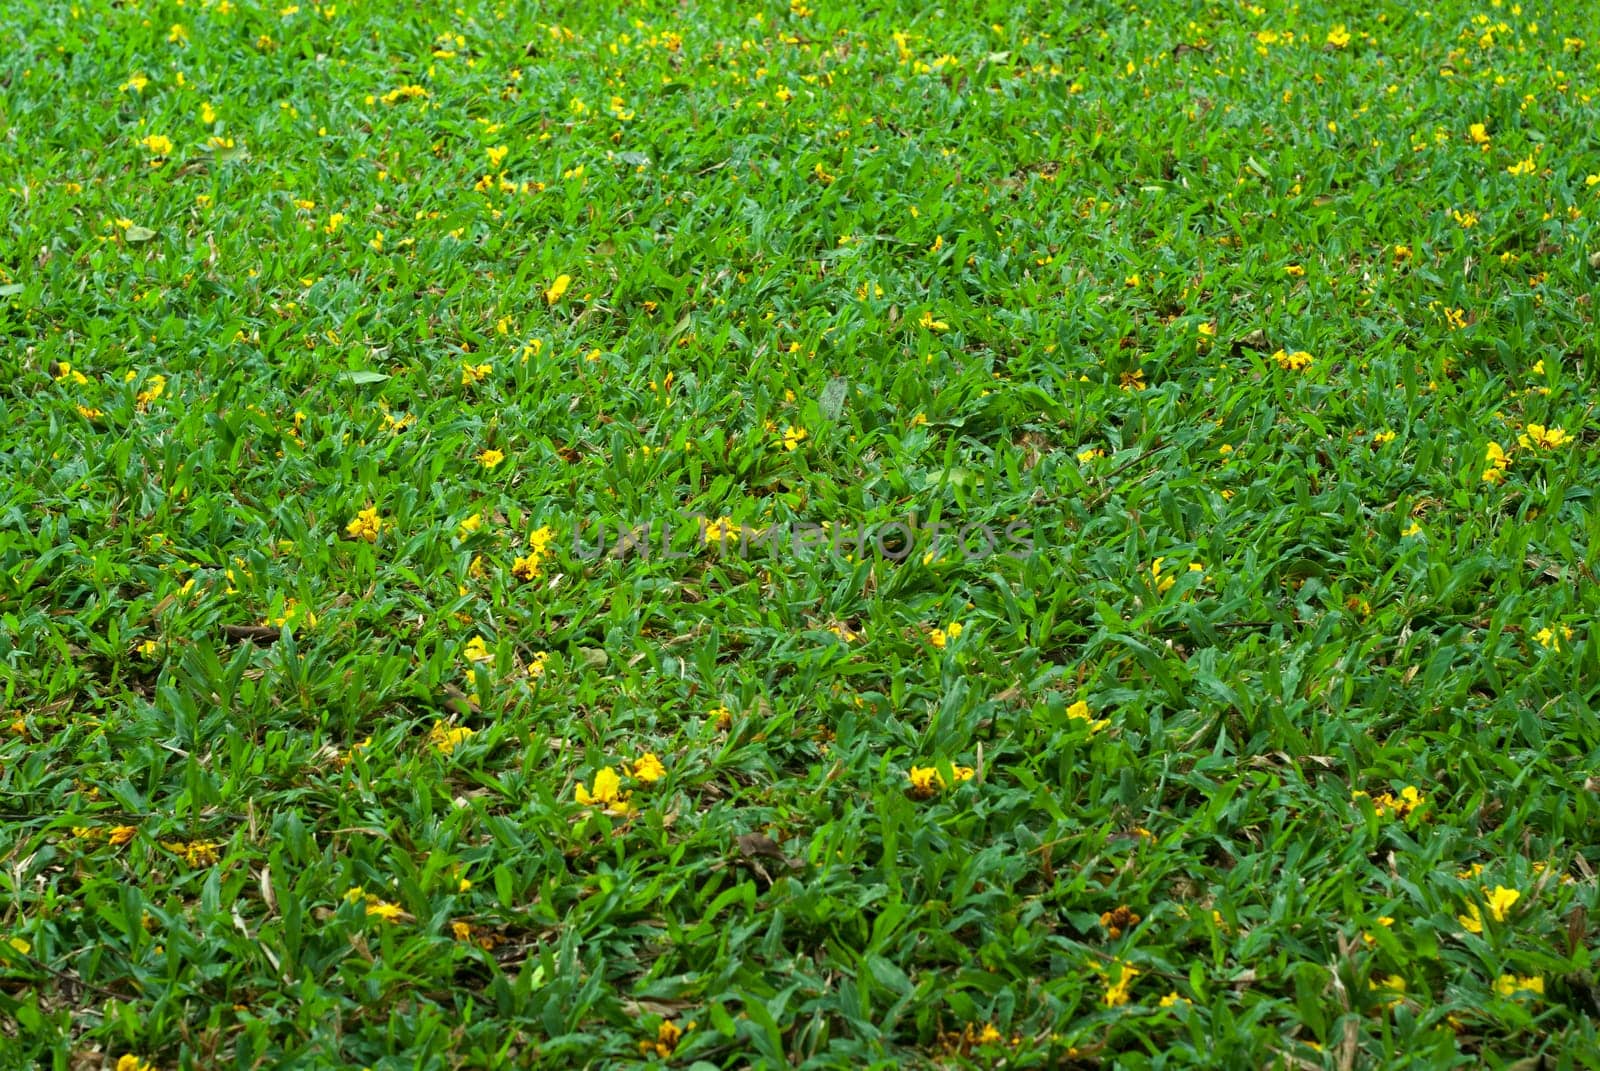 The falling yellow flowers were scattered around the lawn by Satakorn